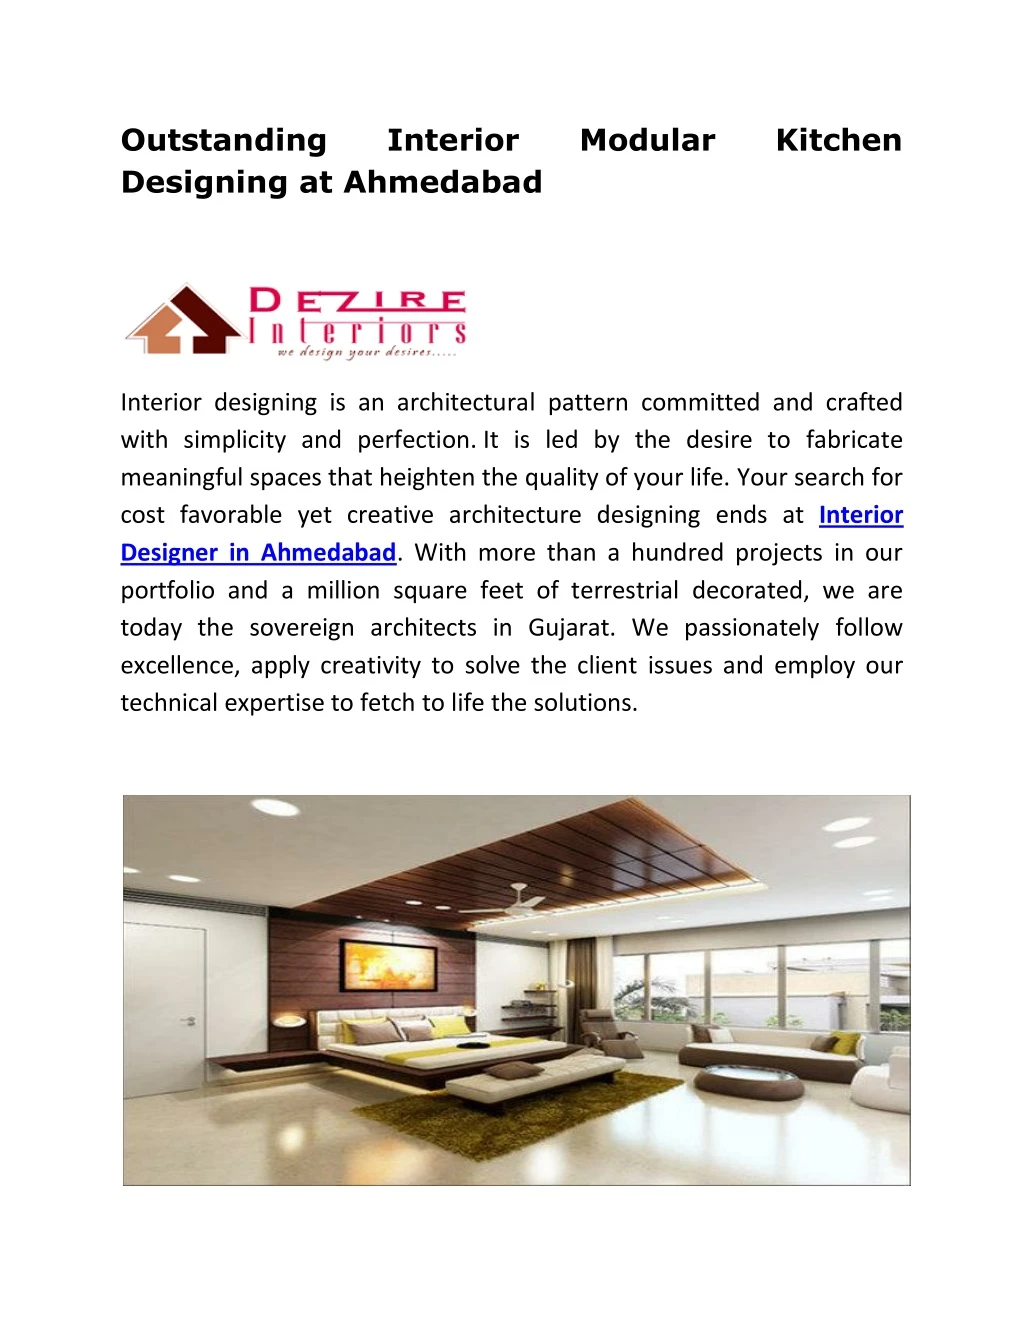 outstanding designing at ahmedabad